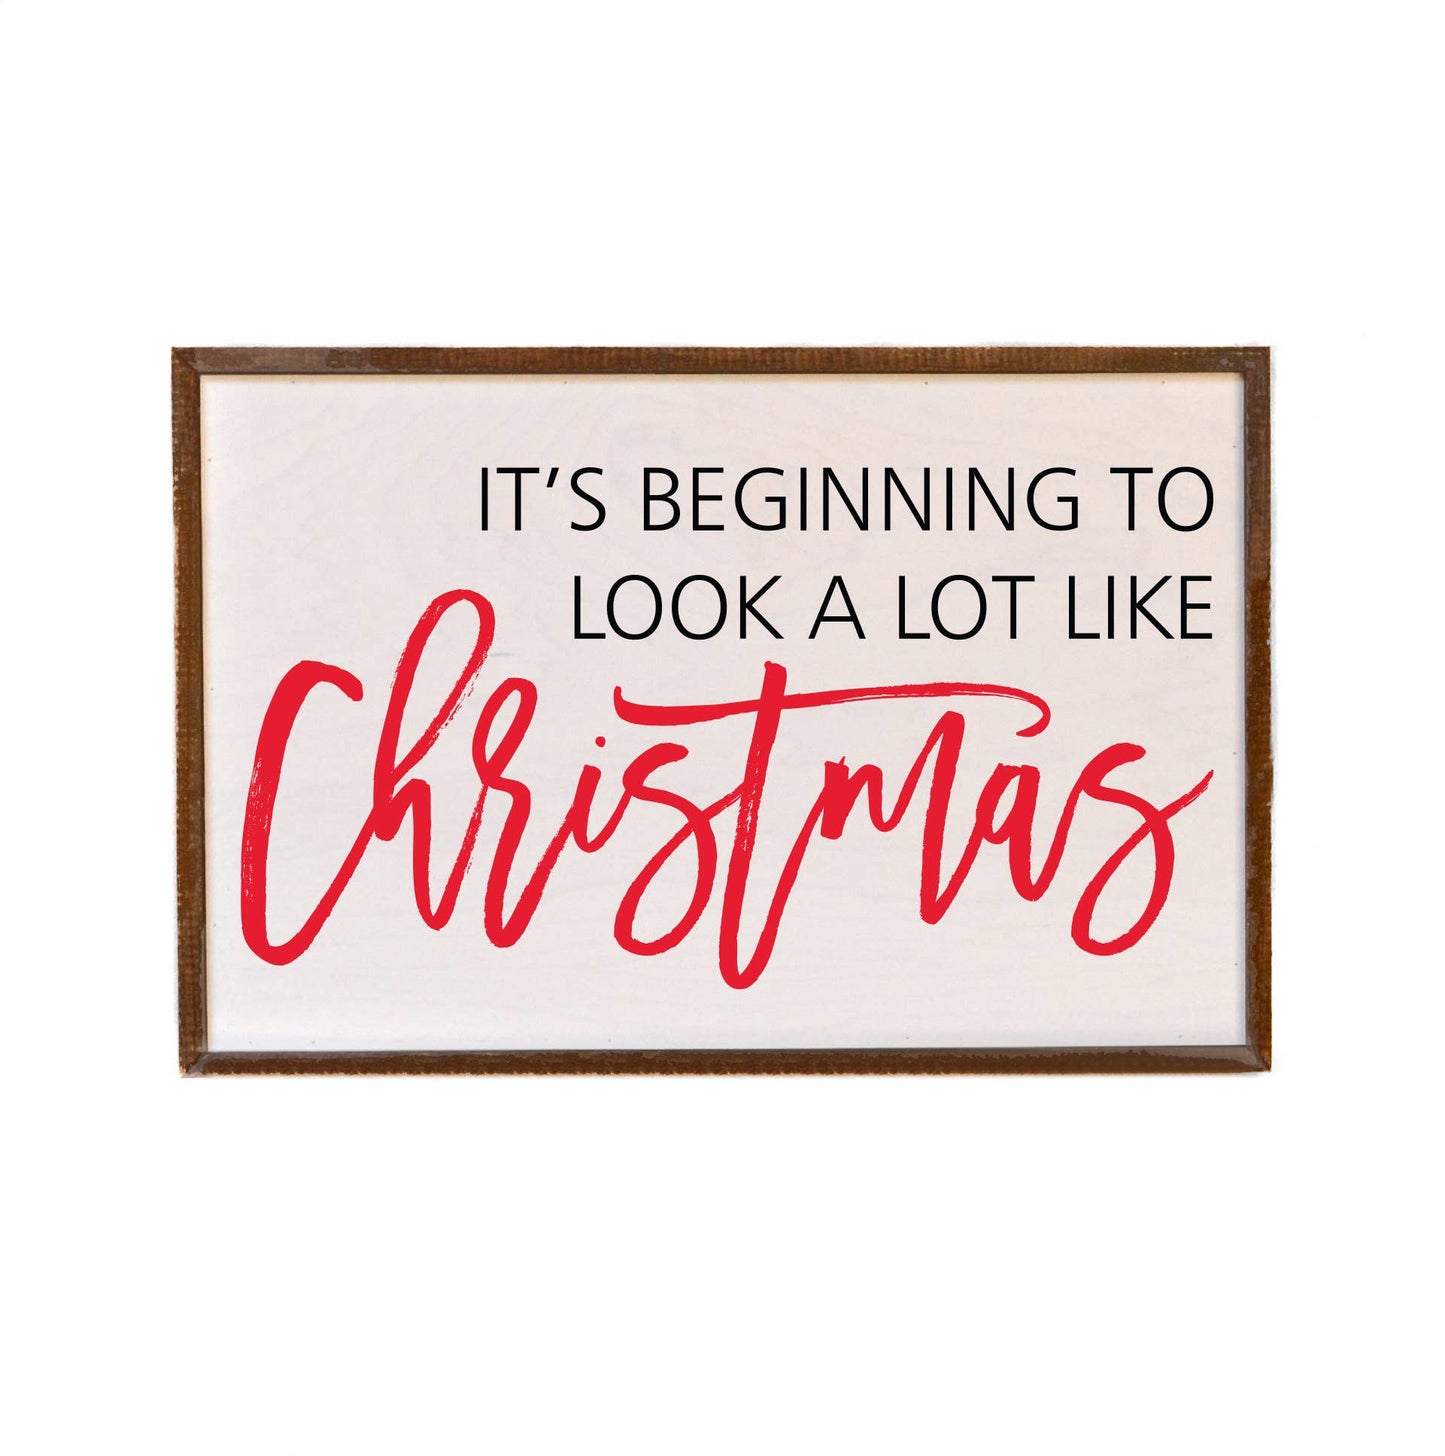 12x18 It's Beginning To Look A Lot Like Christmas - Box Sign